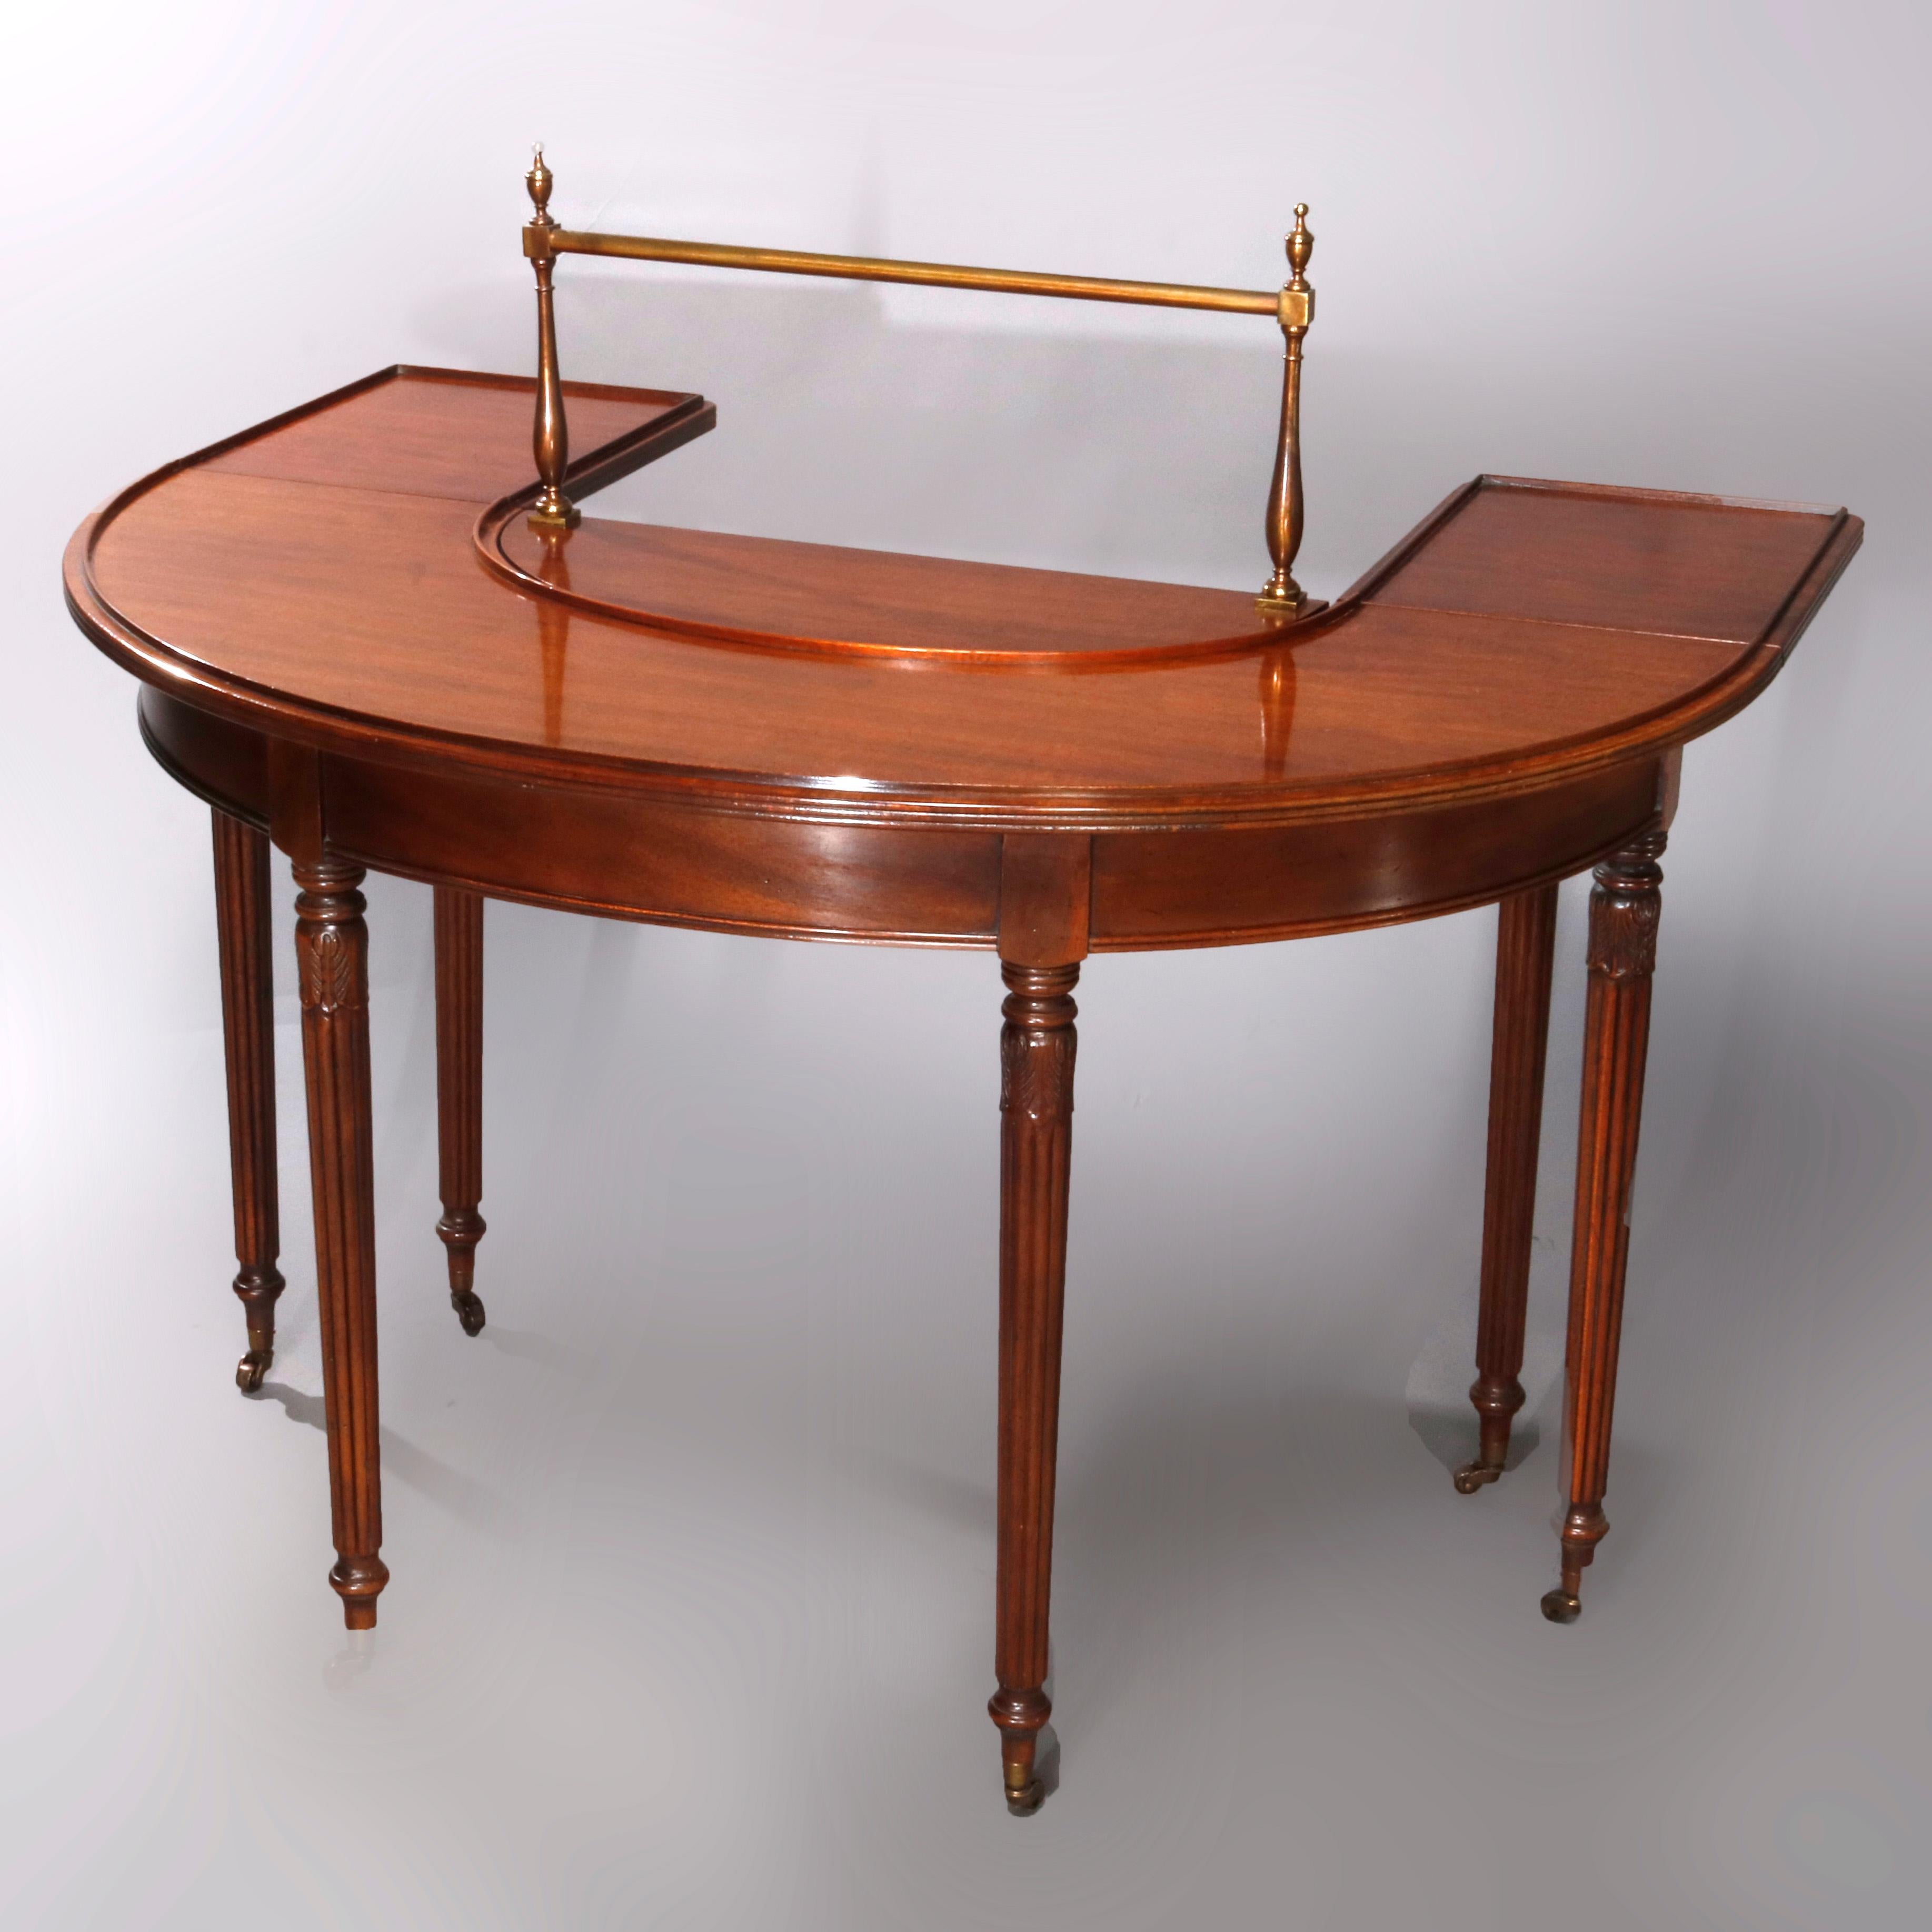 A vintage Sheraton style serving table by Drexel Furniture Co. of the Wallace Nutting collection offers mahogany construction in wraparound demilune form with rear drop leaves and brass linen rail, raised on reeded and tapered legs having foliate